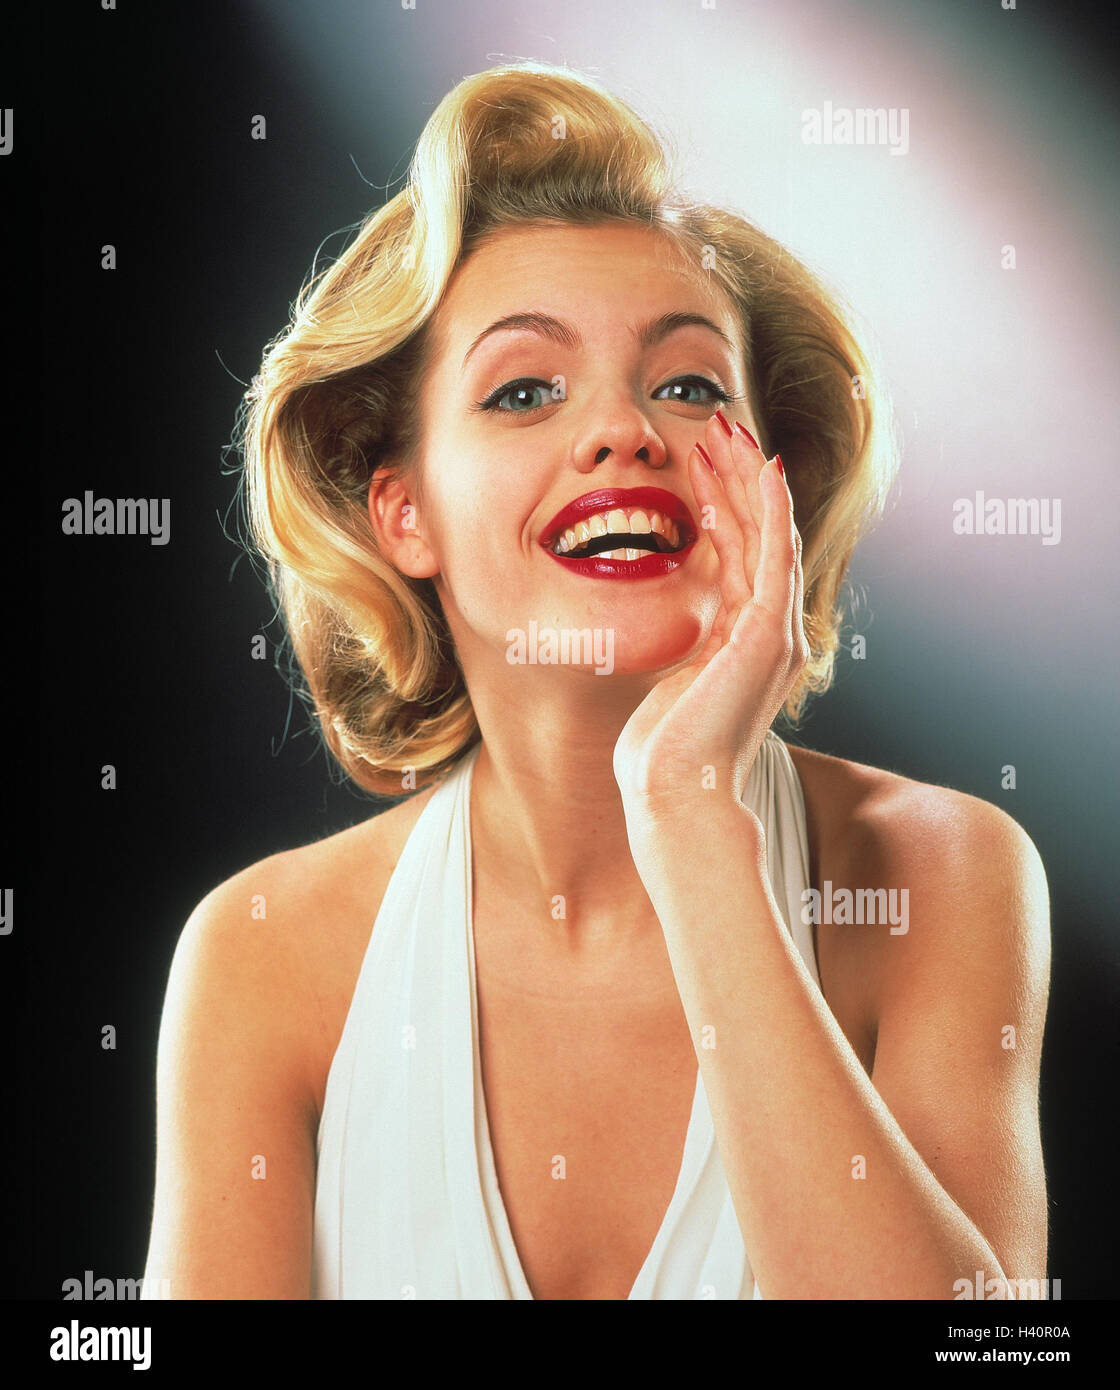 Imitation, Marilyn Monroe, gesture, shout, portrait, women, woman, young, blond, happy, call, stand-in, studio, exclaim, announce, announcement, shout, Stock Photo